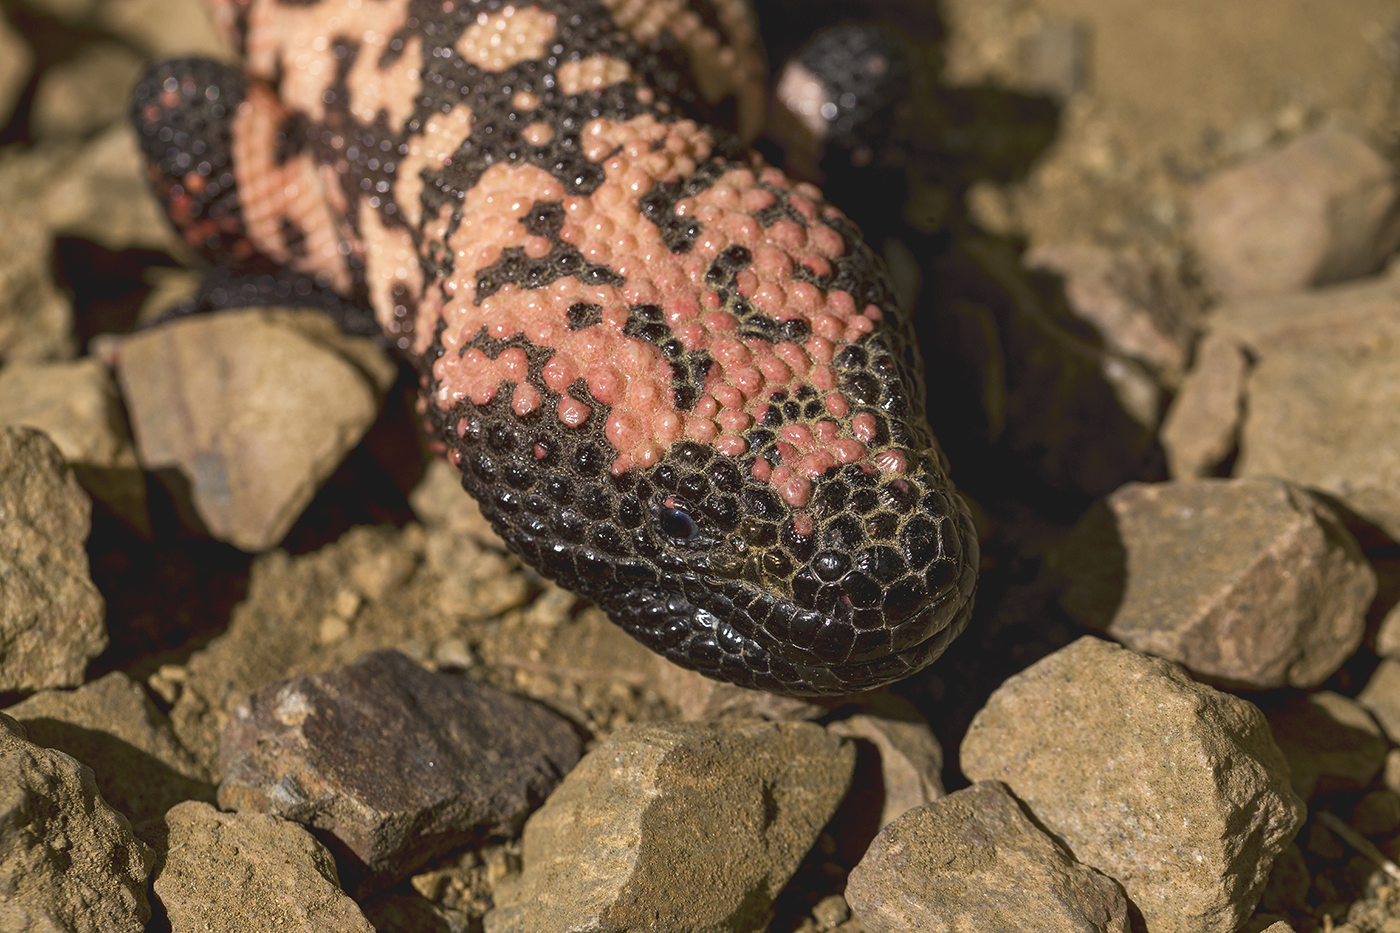 Gila monster Heloderma suspectum Like other reptiles, Gila monsters have three-layered chromatophores in their skin that produce their color. Unlike many reptiles, though, Gila monsters are not green—and they’re not yellow, either. Their coloration is the result of the dark melanin layer dominating. The black areas have lots of melanin and the lighter areas have varying amounts, which combine with some of the xanthophore layer of yellow/red to produce everything from dark orange to almost pink.